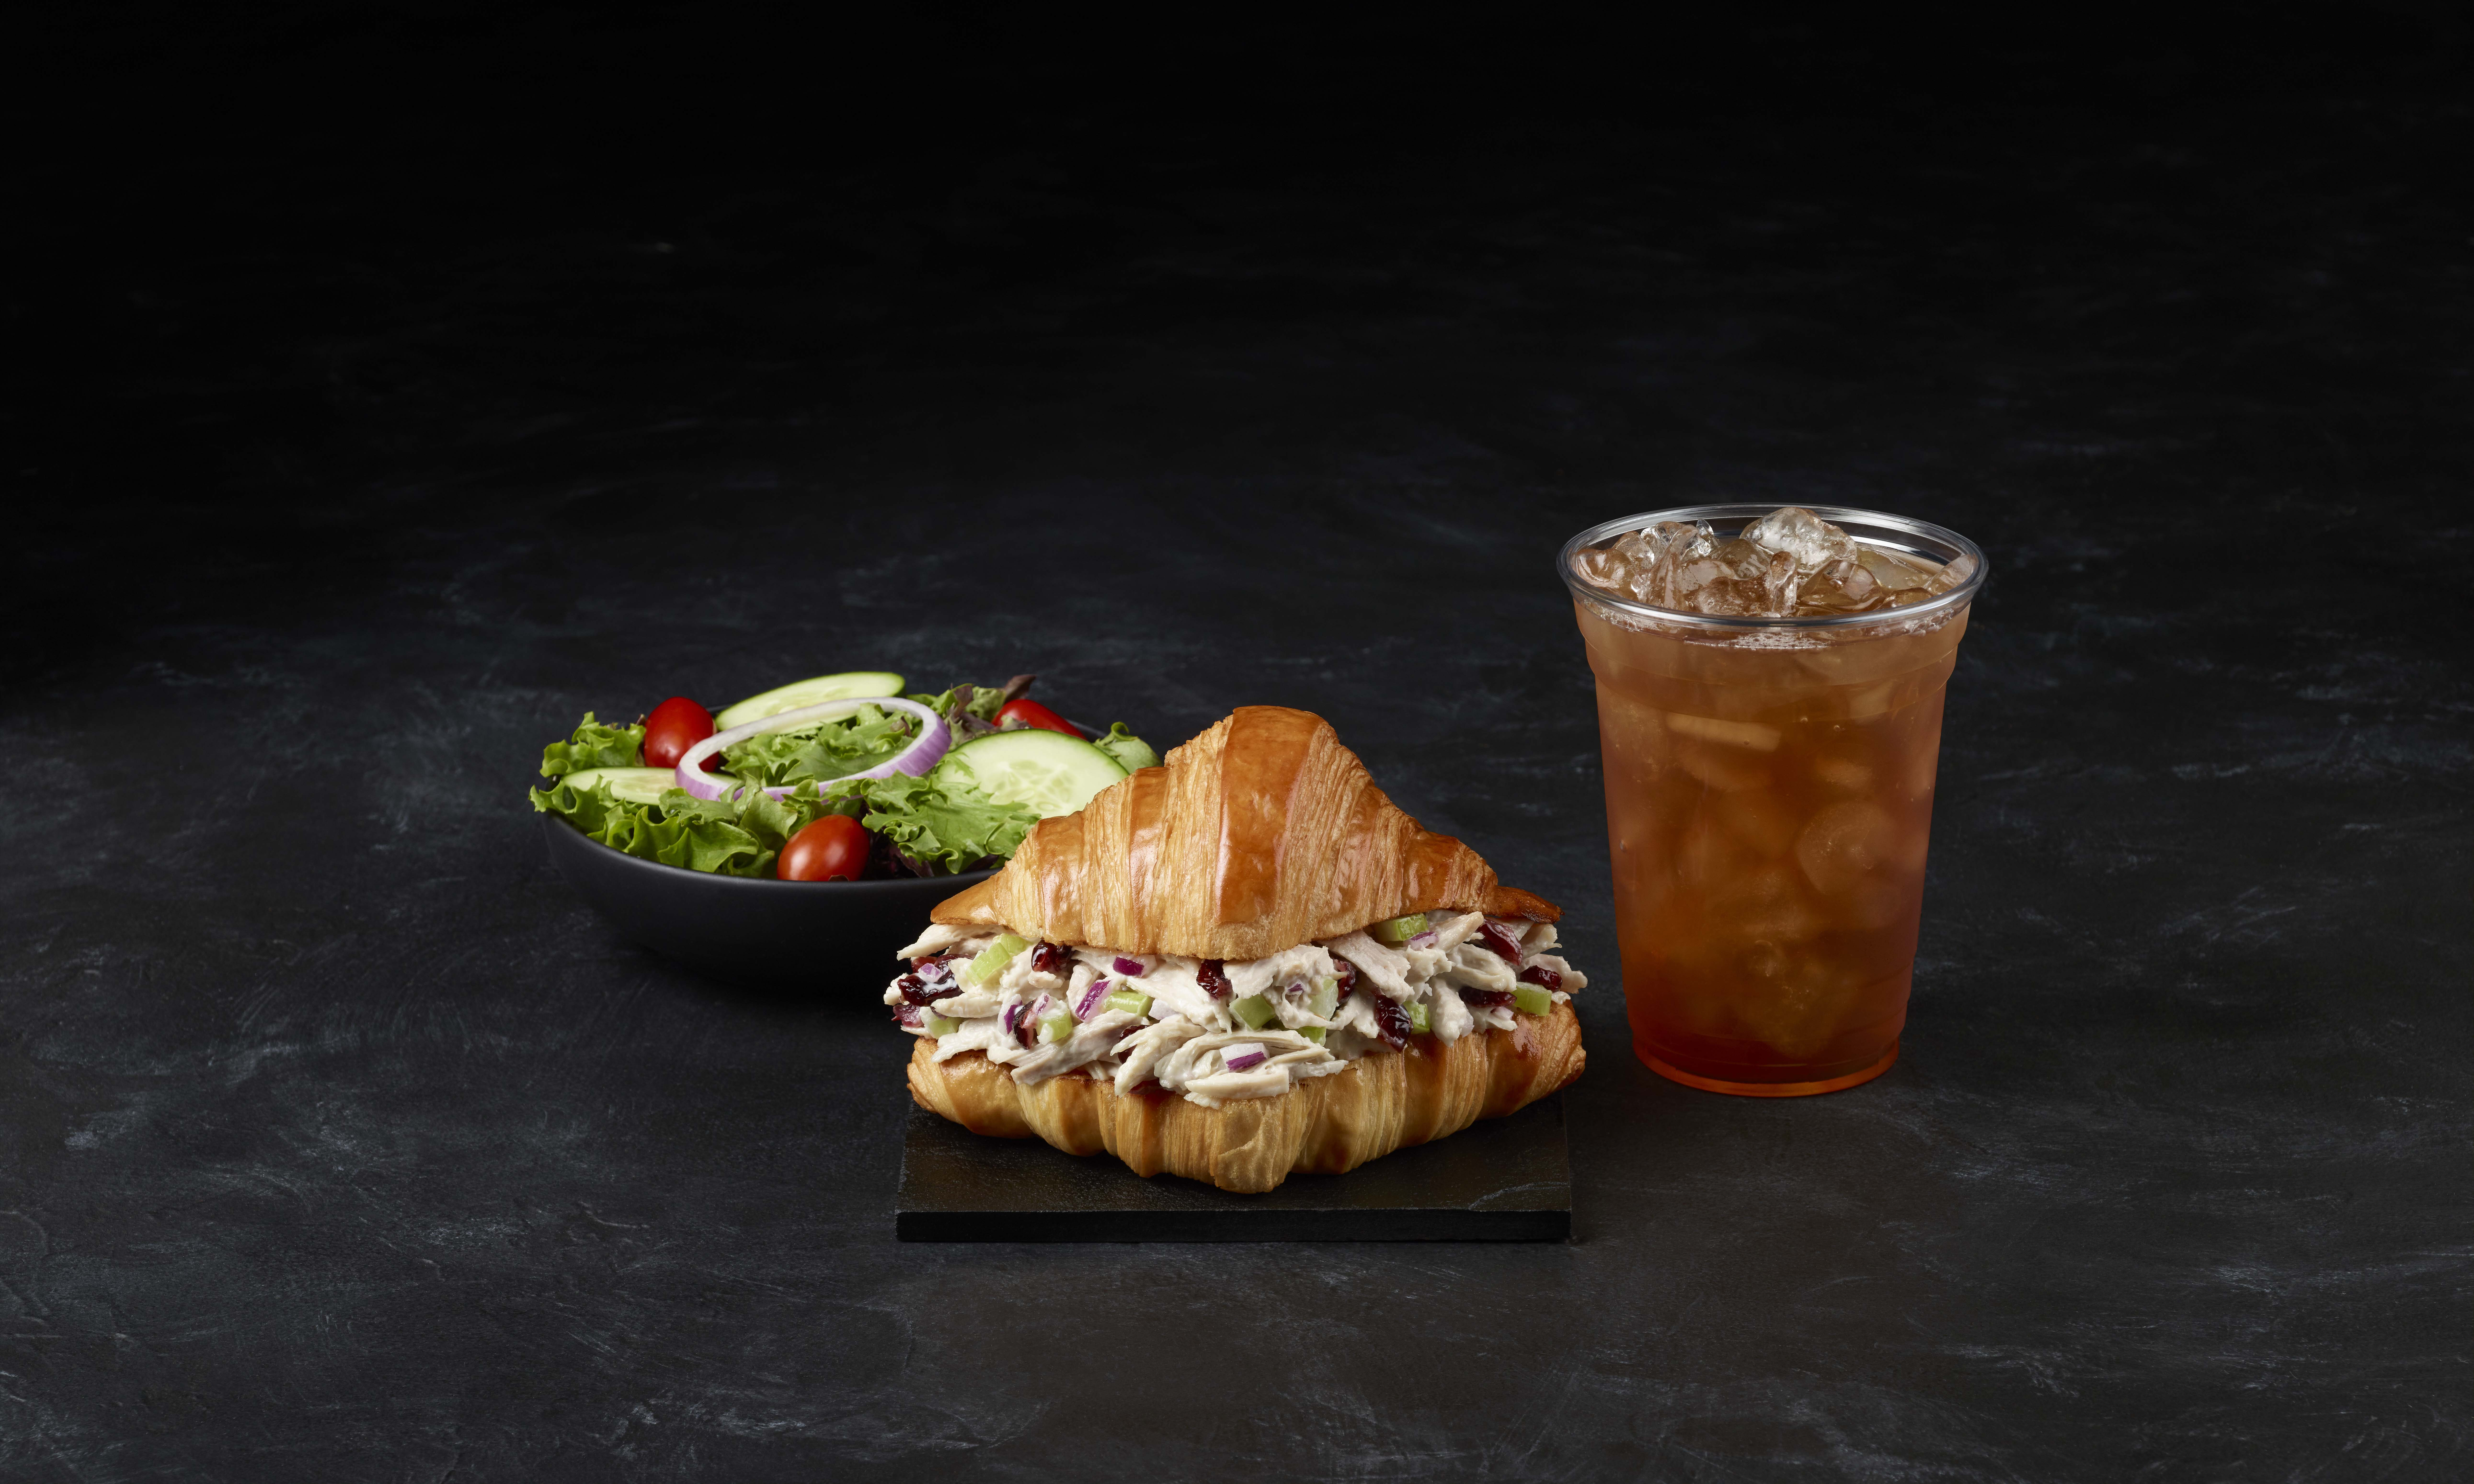 Salad, Cranberry Chicken Croissant, and Fountain Tea